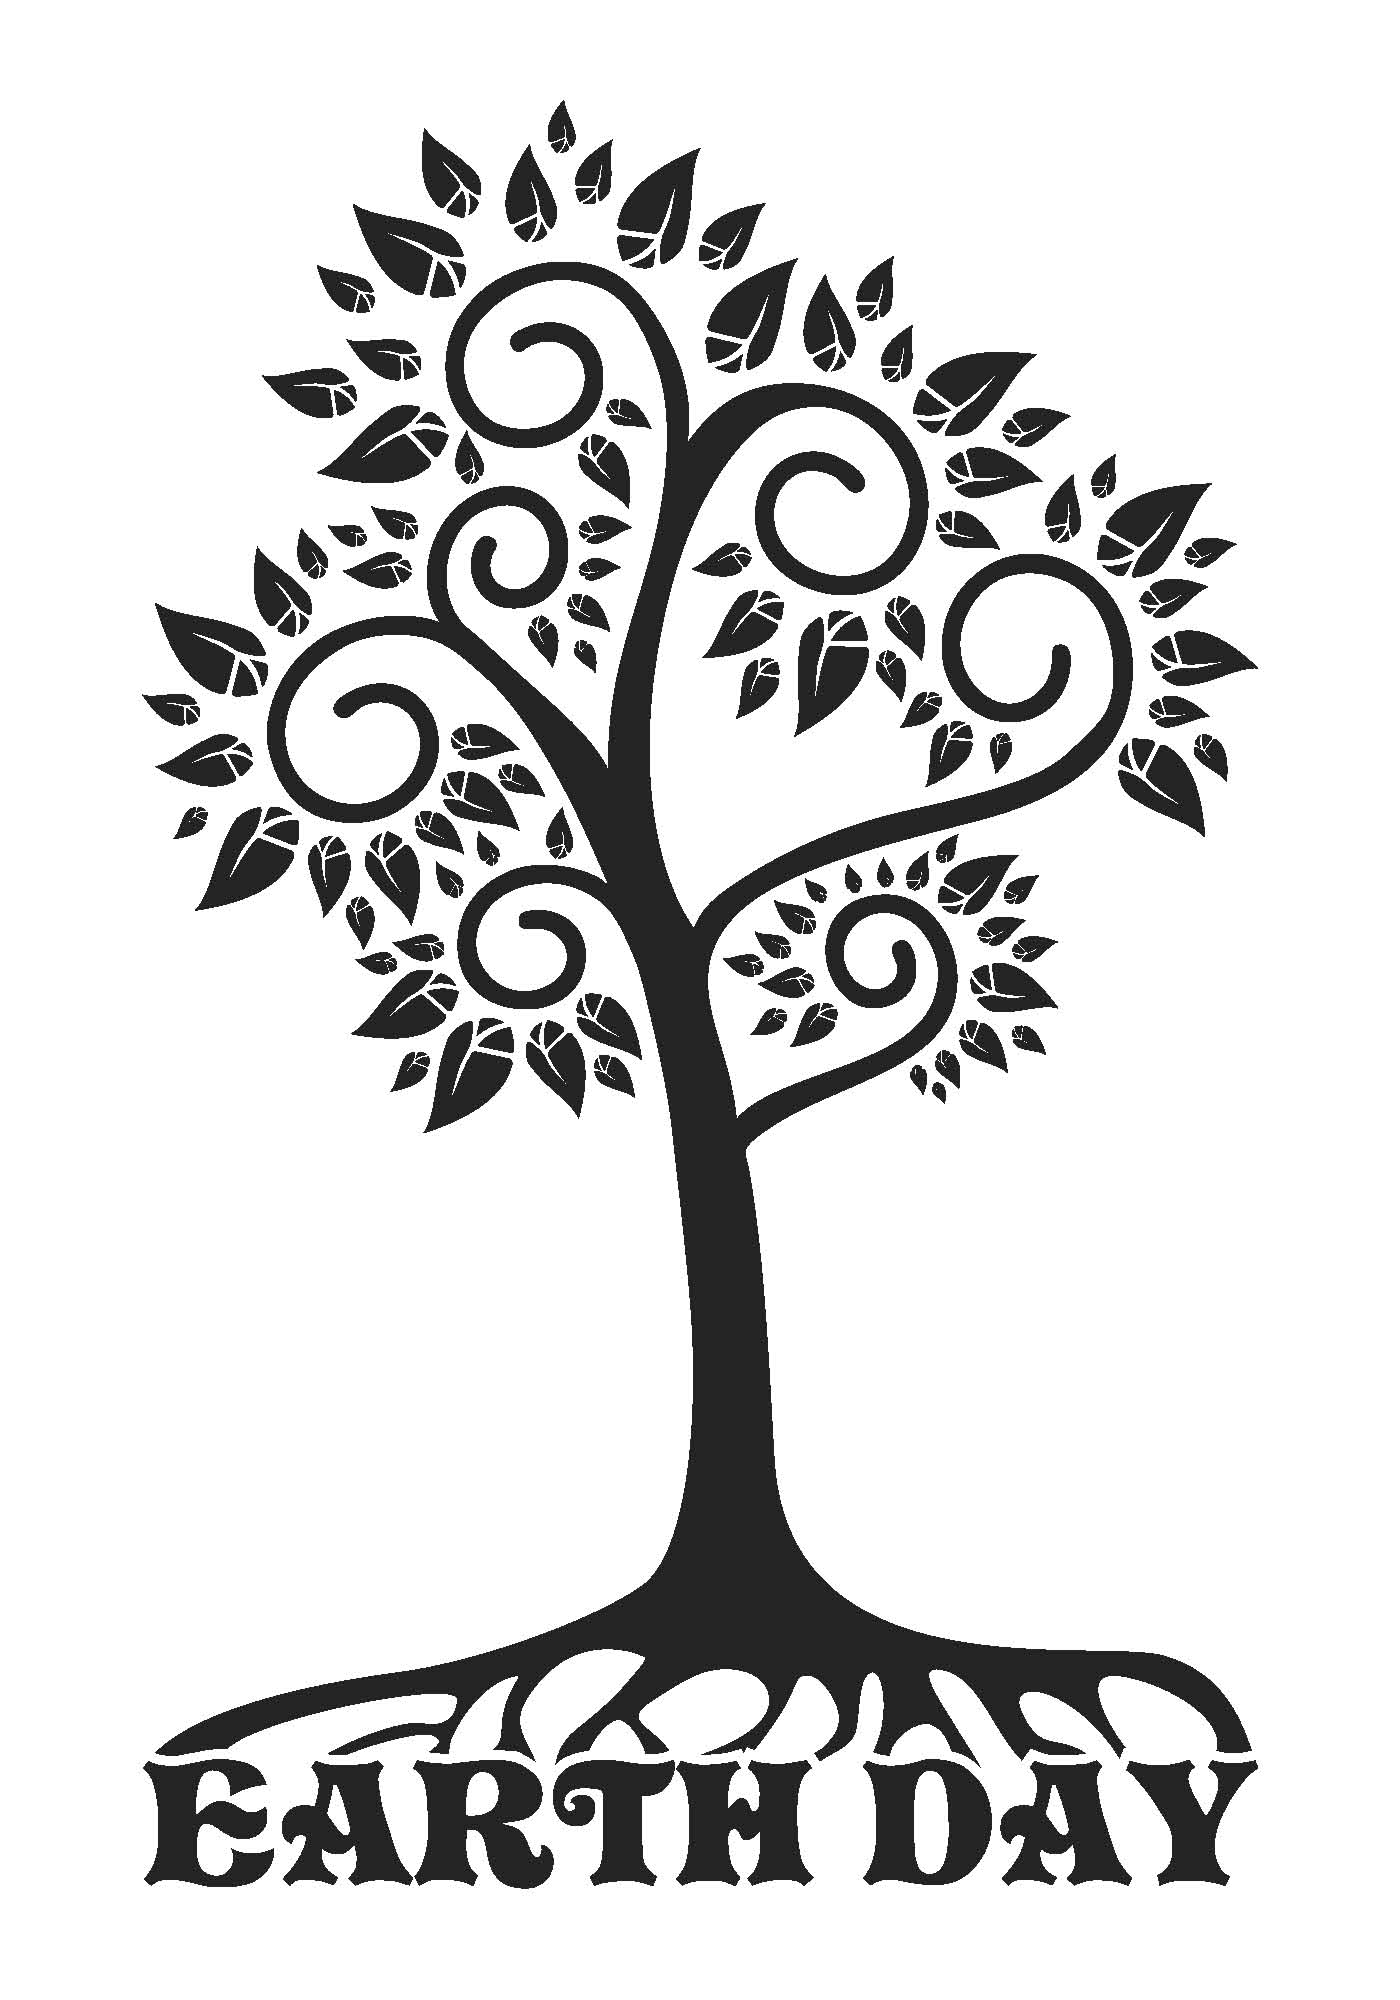 Tree on earth clipart black and white